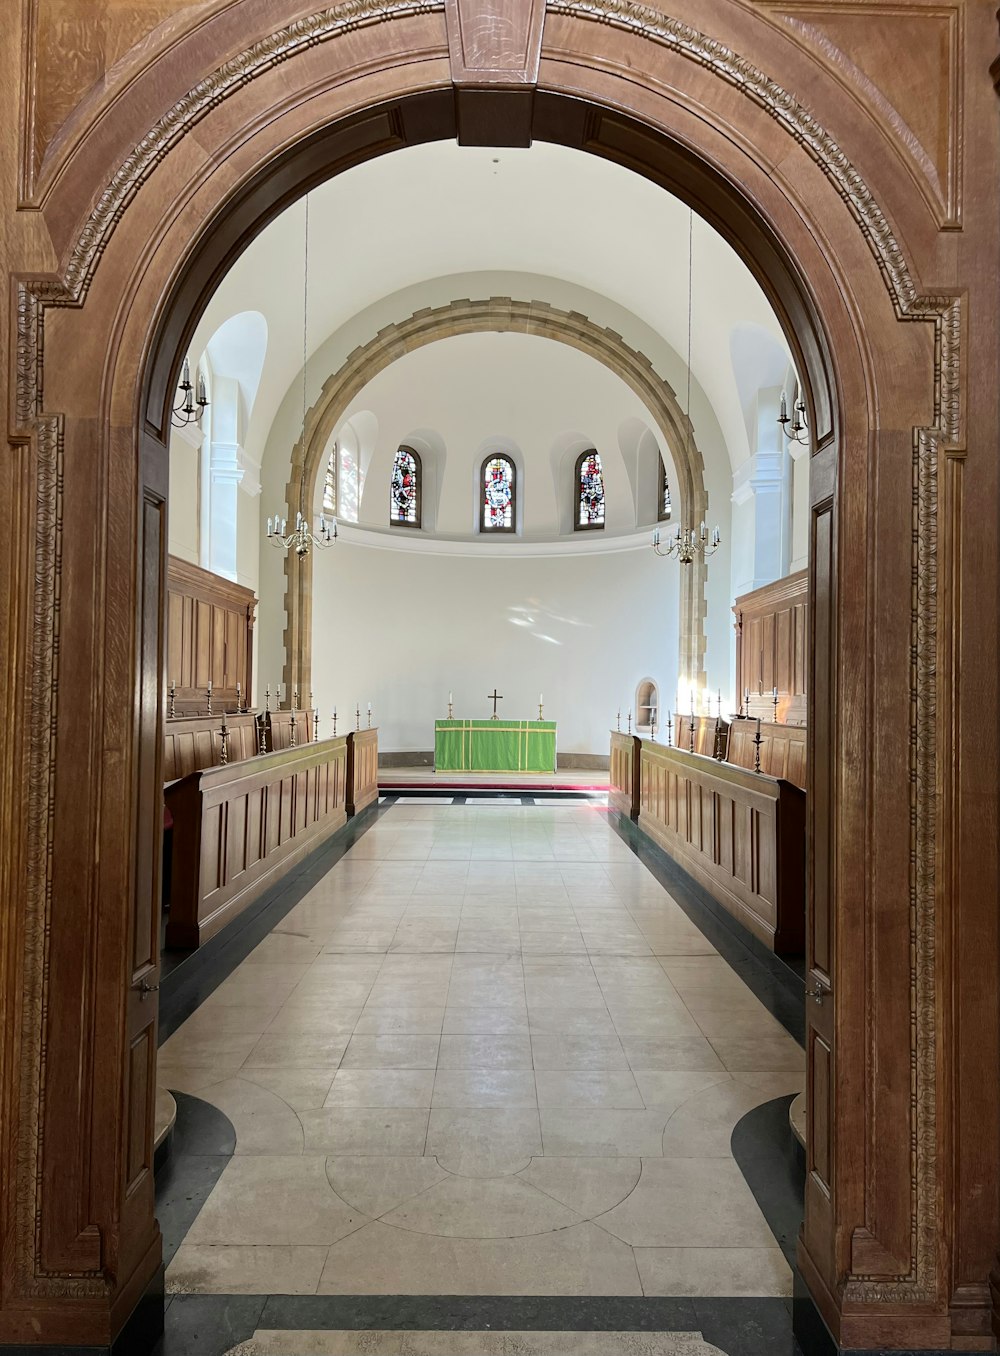 an arched doorway leading to a church with pews